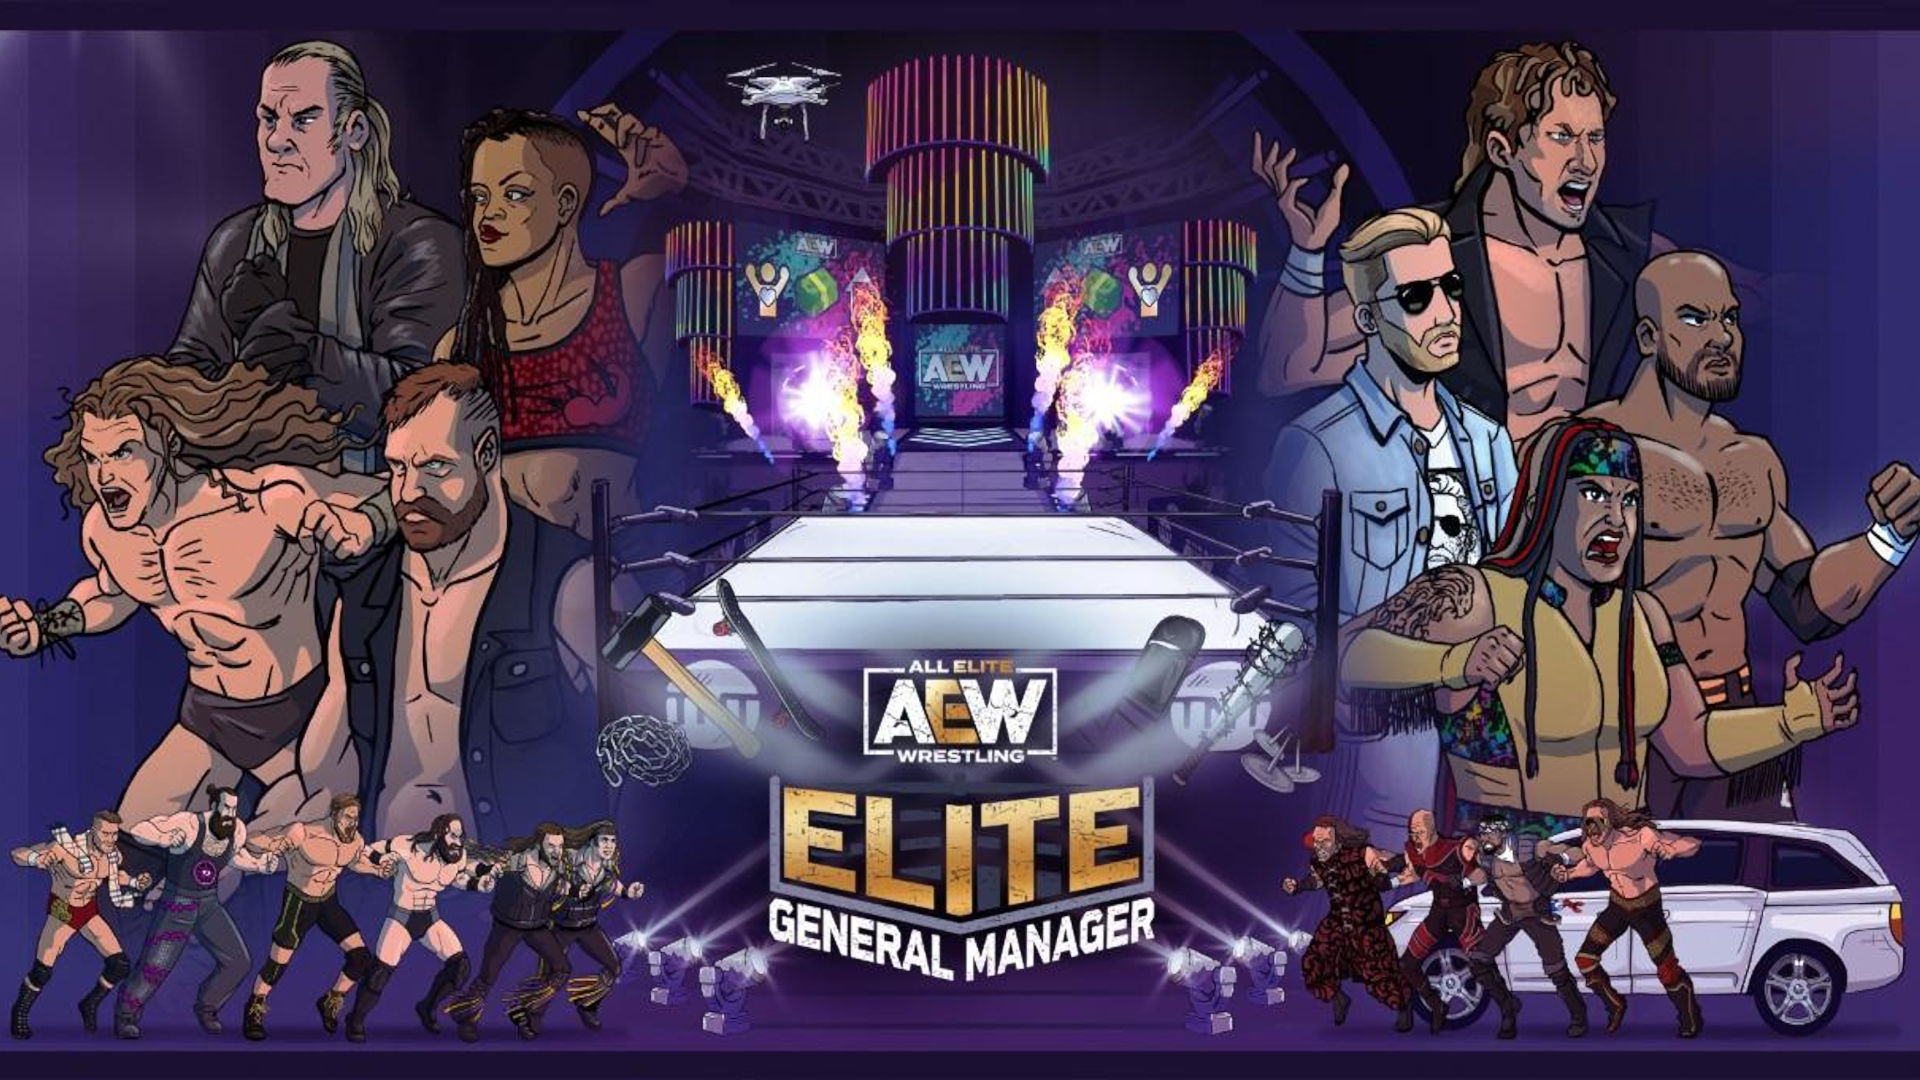 AEW promotional image, showing the logo surrounded by fighers